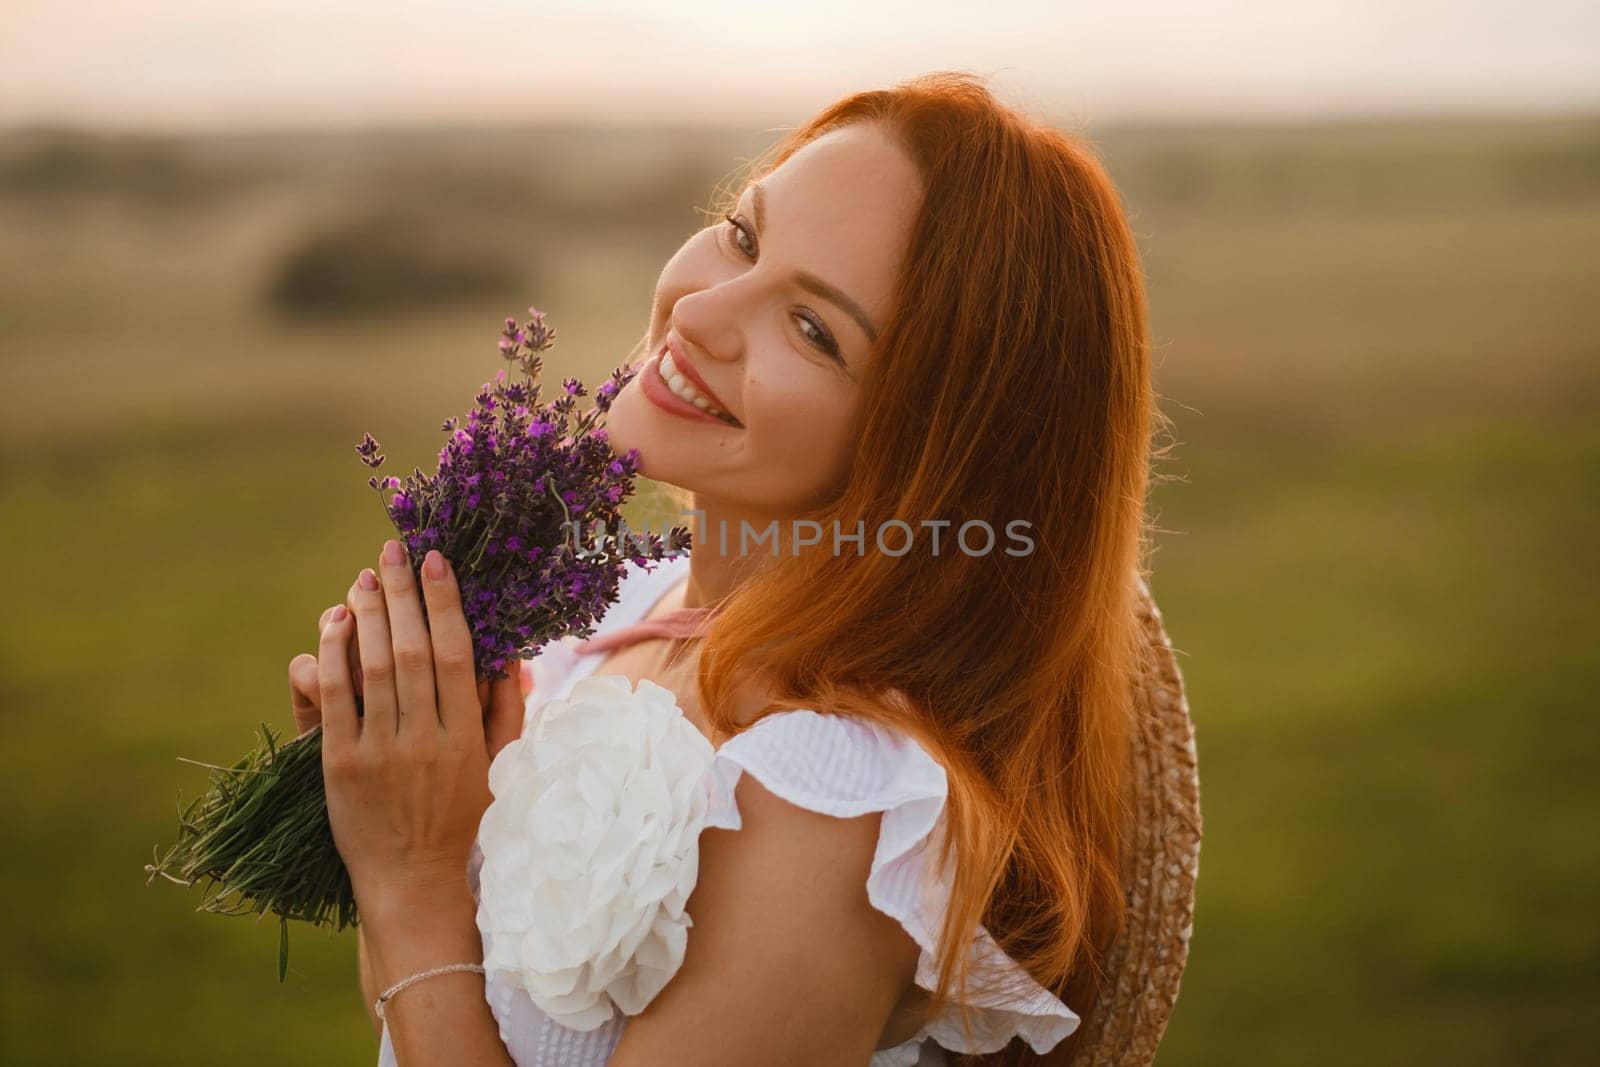 A girl in a white dress with a bouquet of lavender flowers stands in a field at sunset.